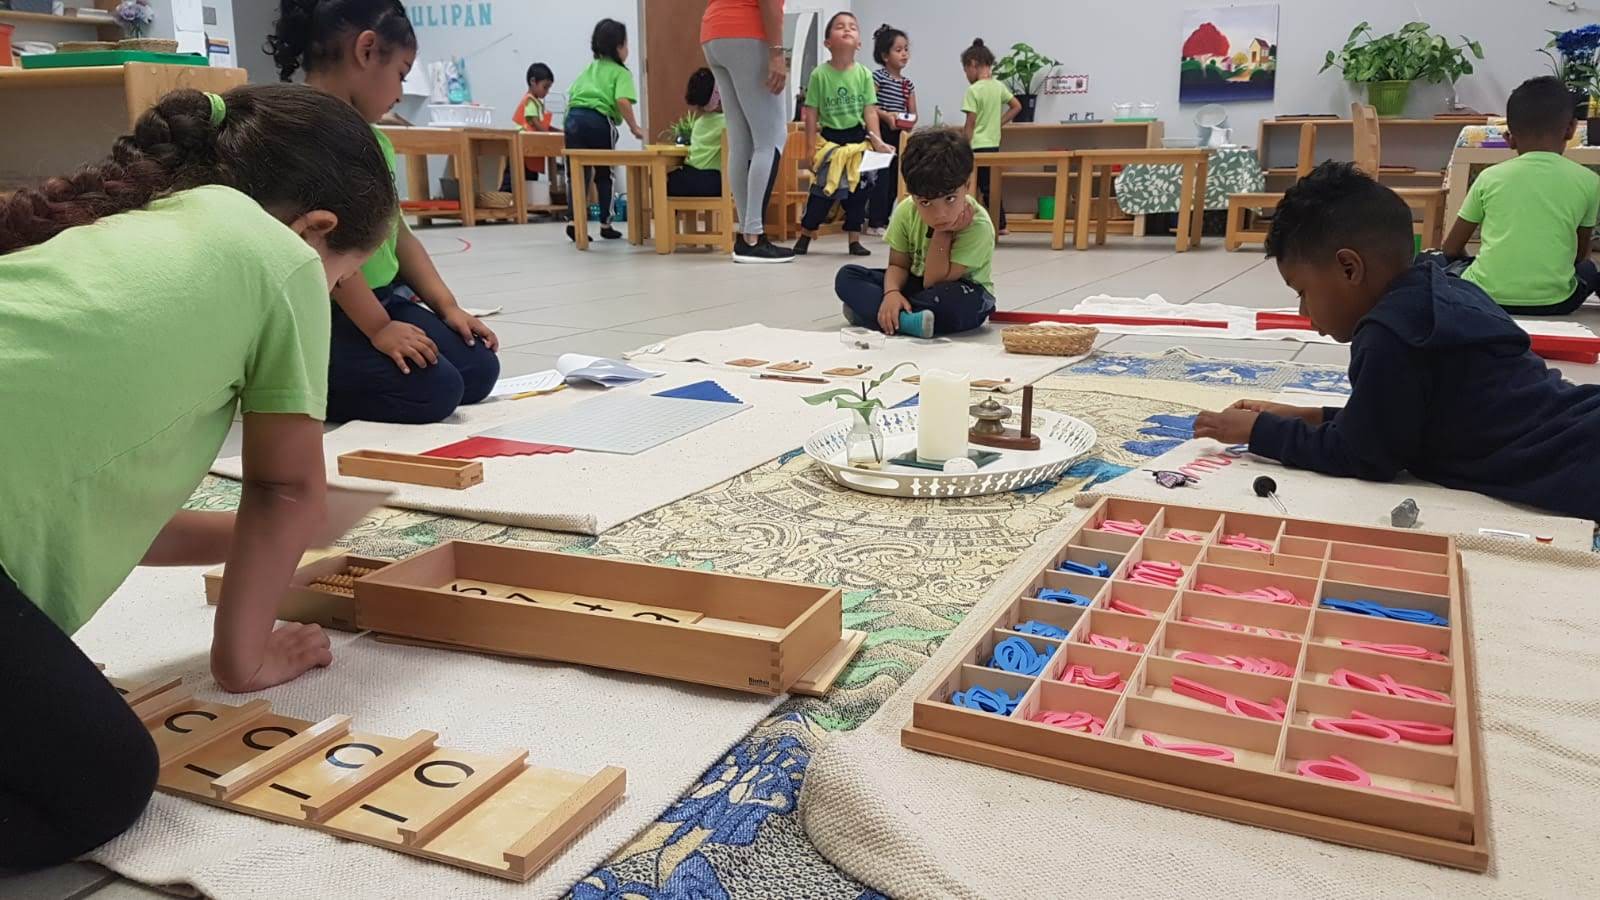 ten young elementary school children, ethincnally diverse, working on projects in their classroo,m. Children in foreground are sitting or laying on the floor working with woodent blocks, shapes and numbers